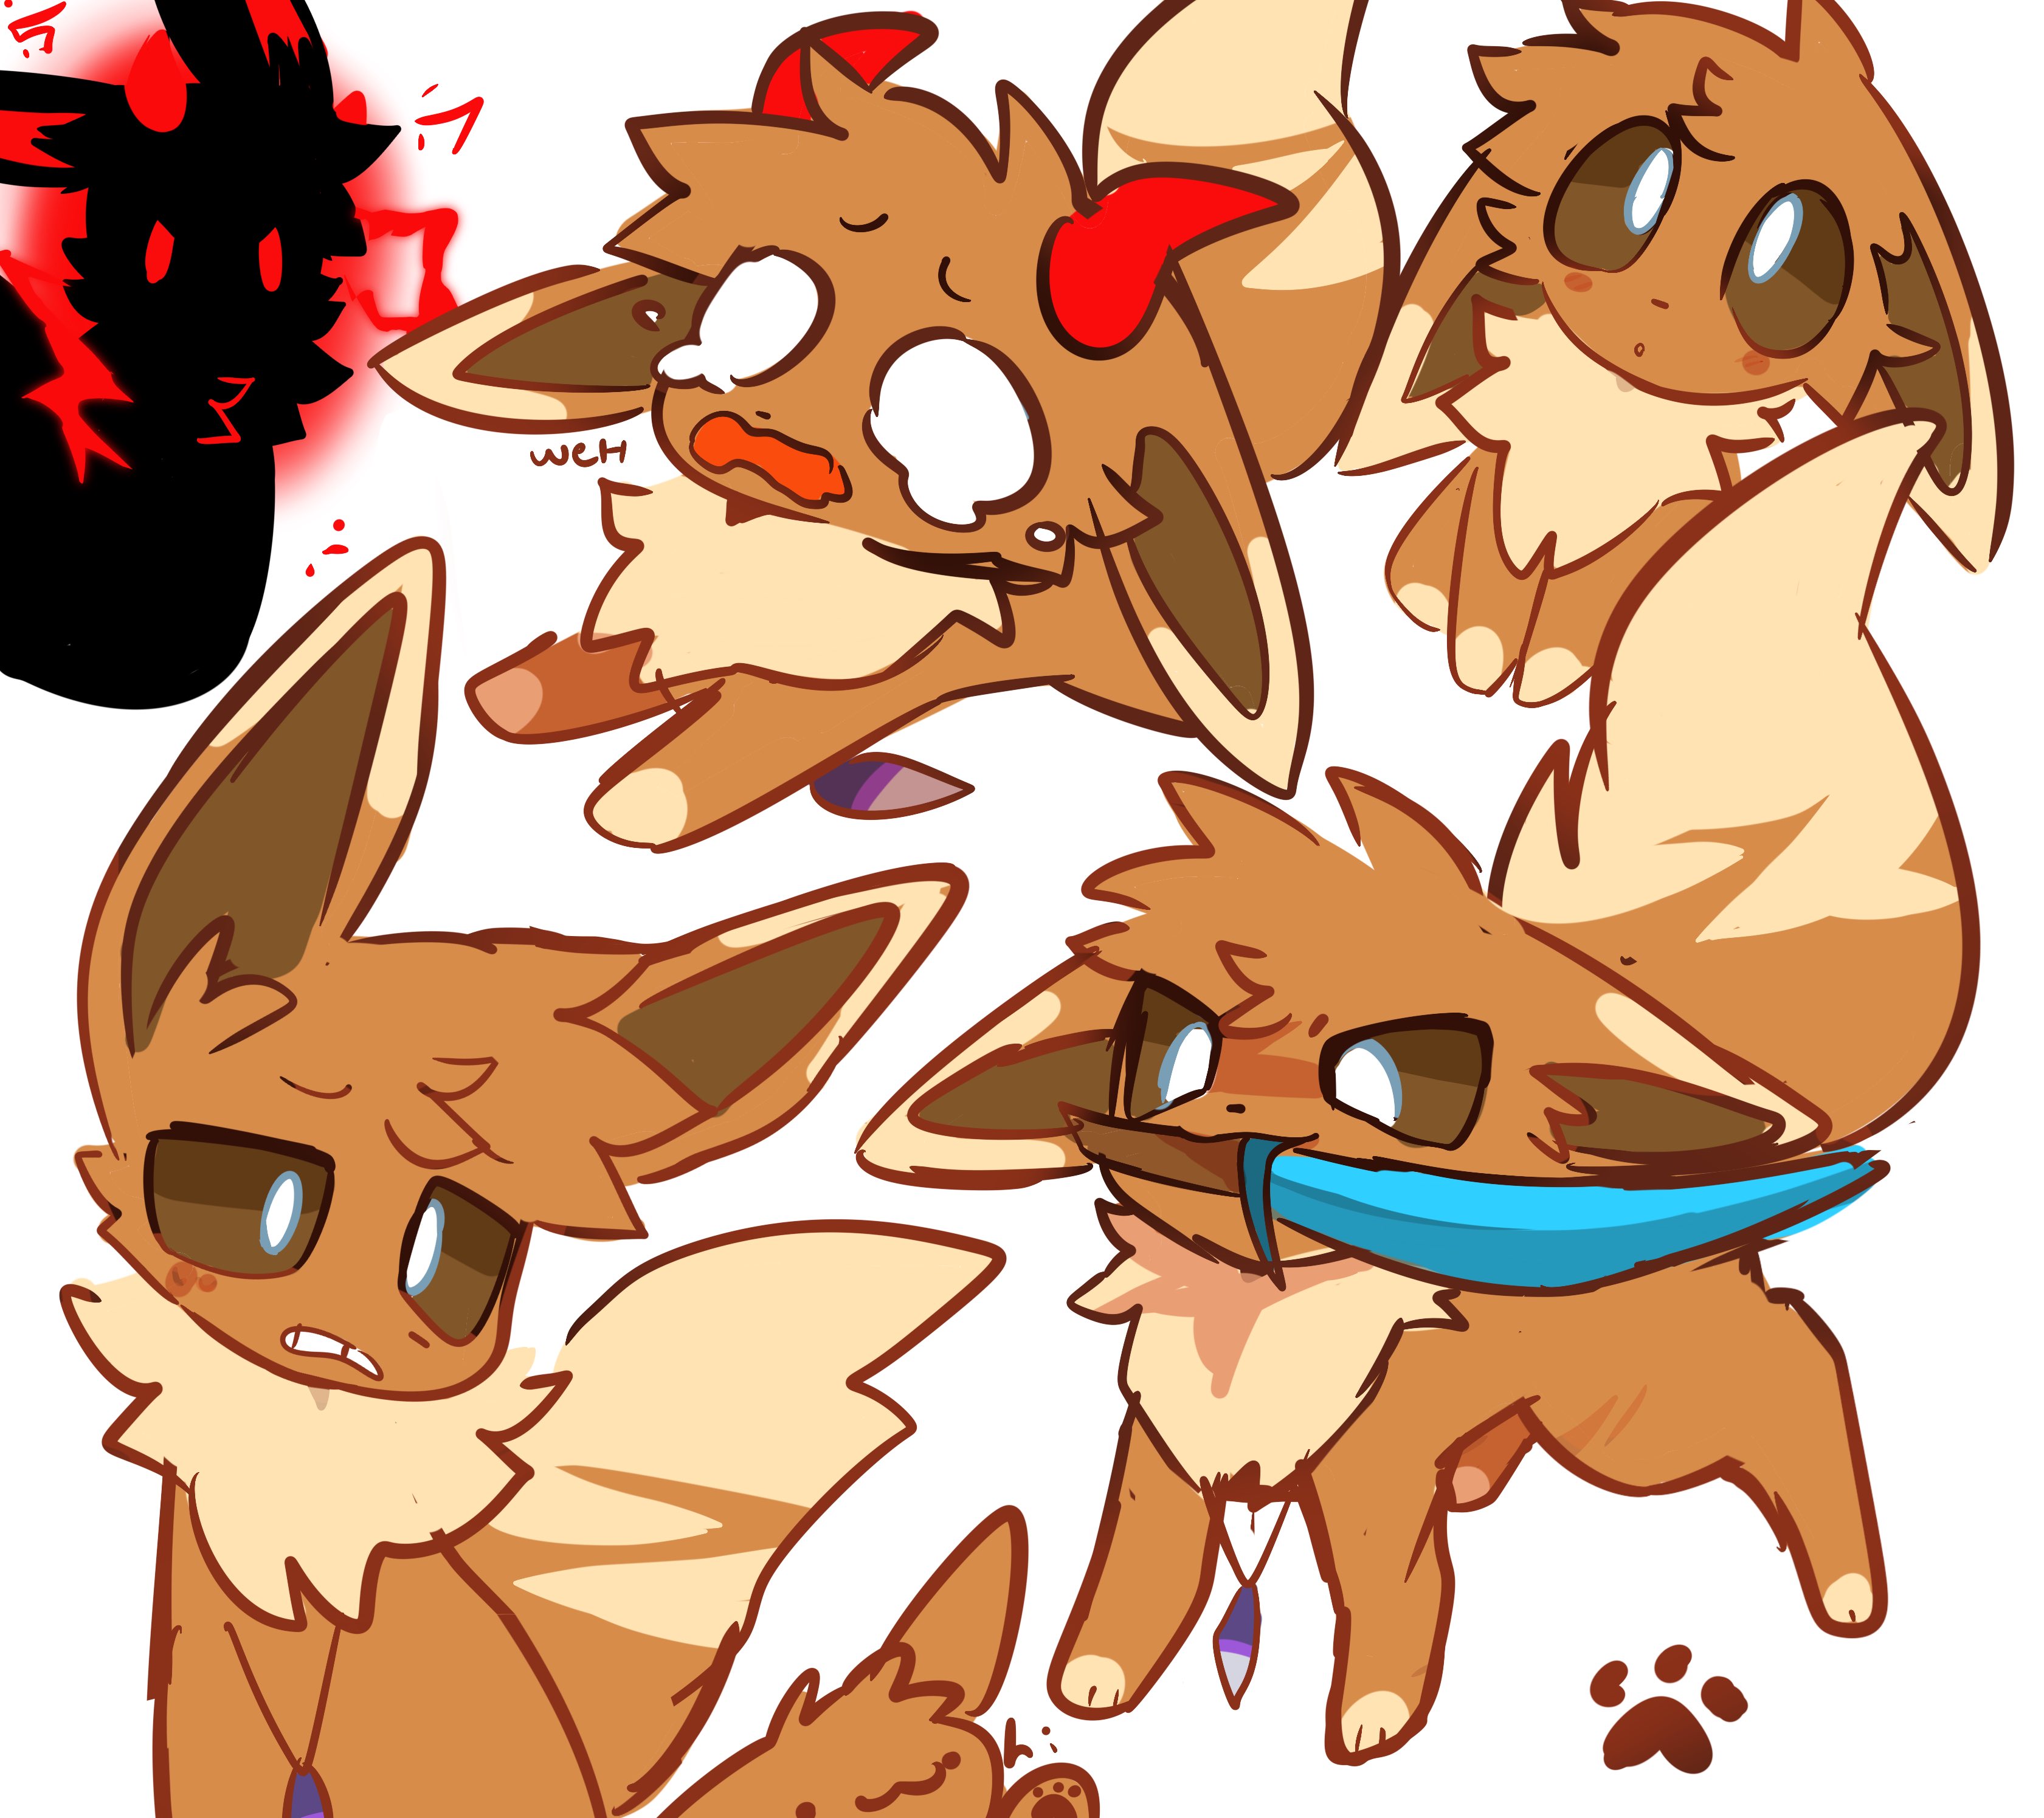 goob on X: I would be a really cool eevee